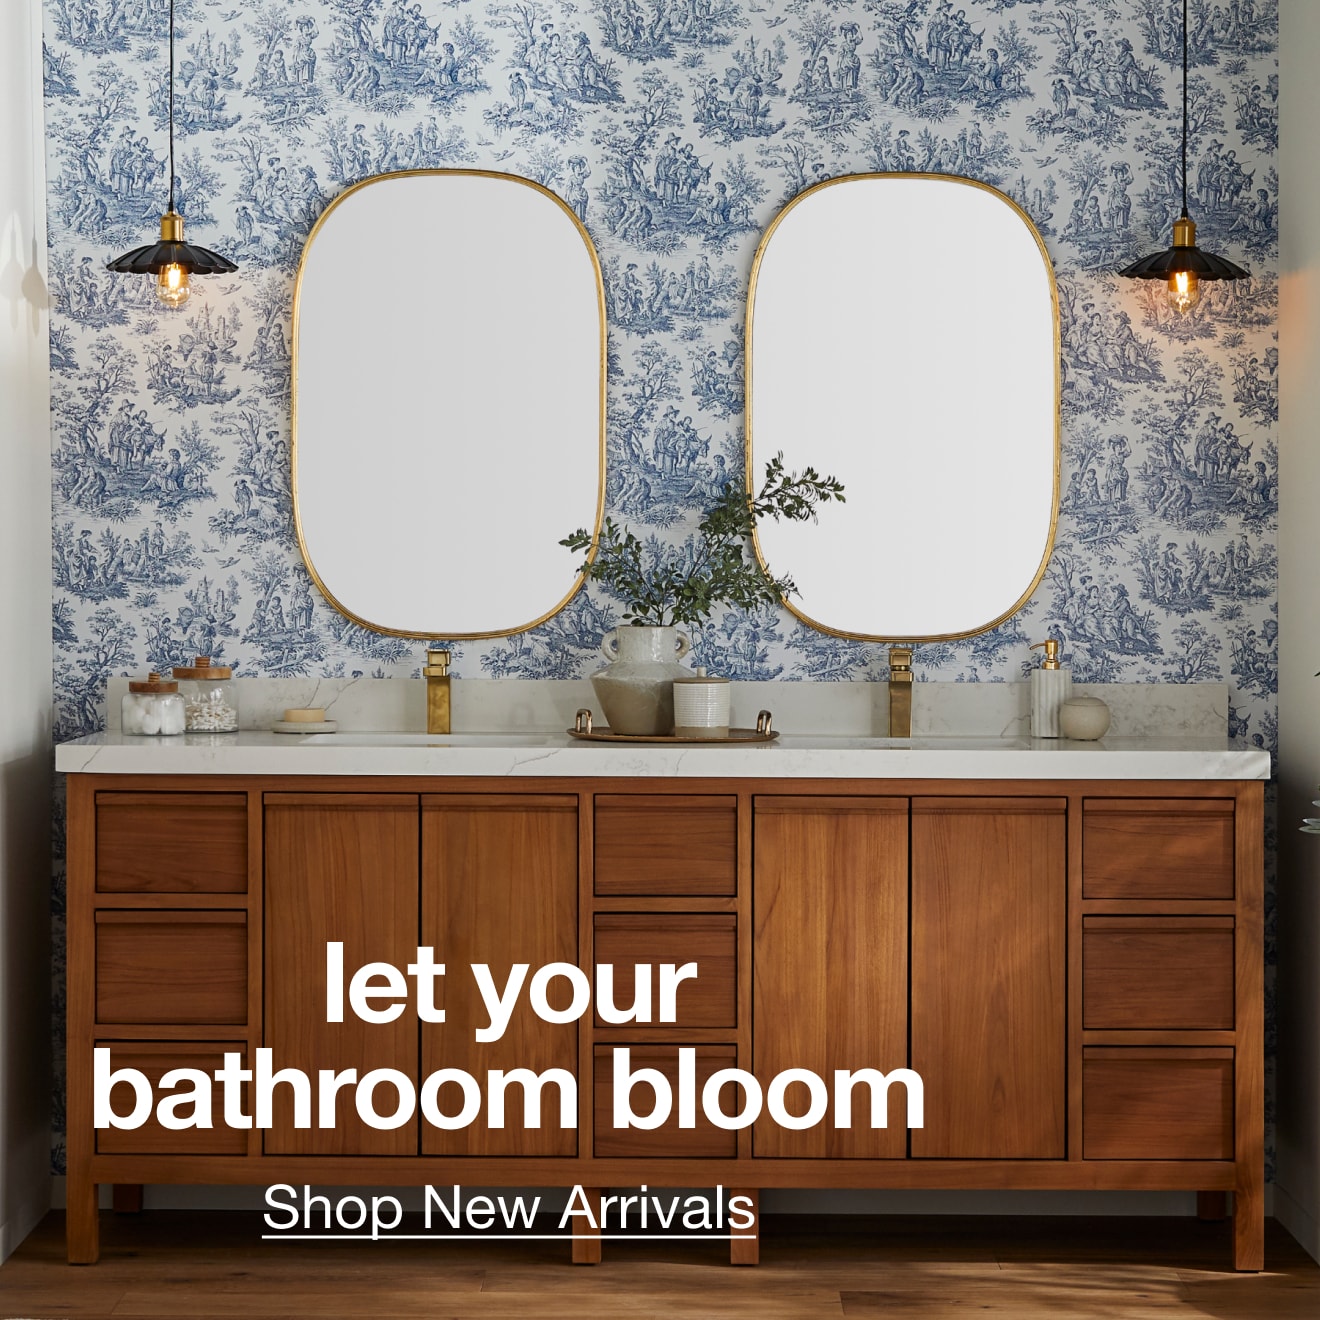 New Arrivals in Bathroom — Shop Now!